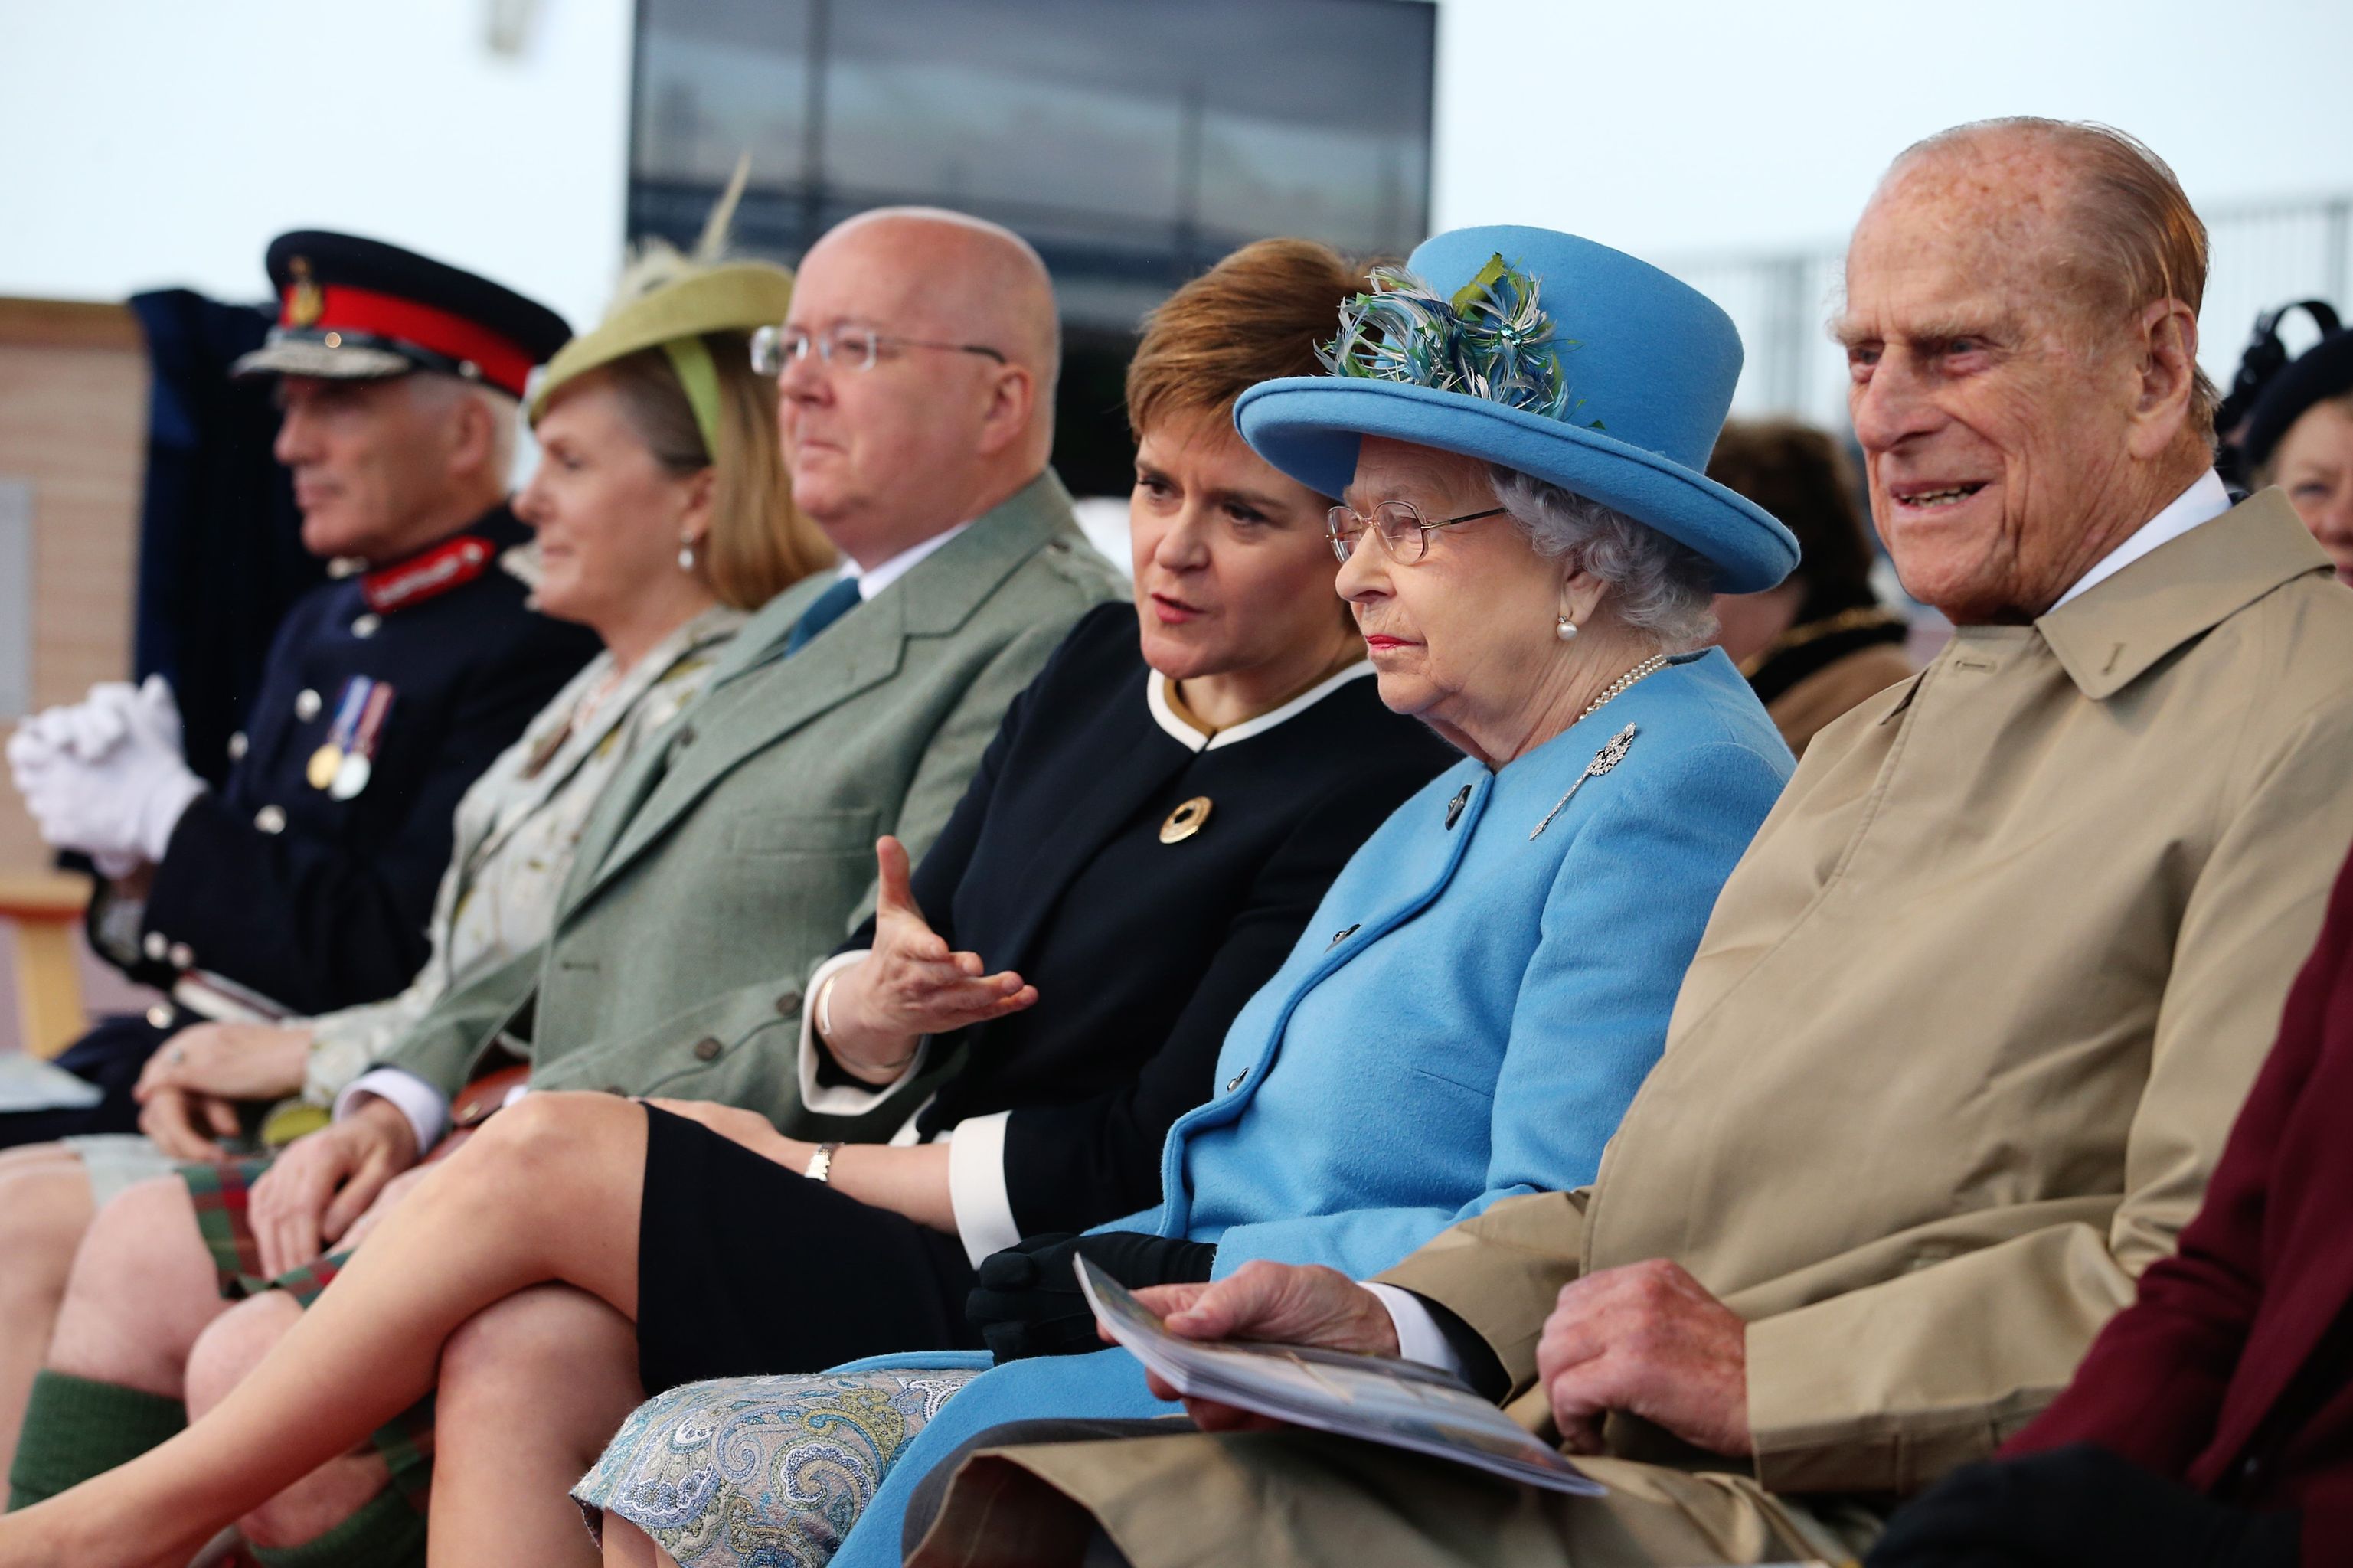 Prince Philip and the Queen attended the opening of the Queensferry Crossing in 2017.